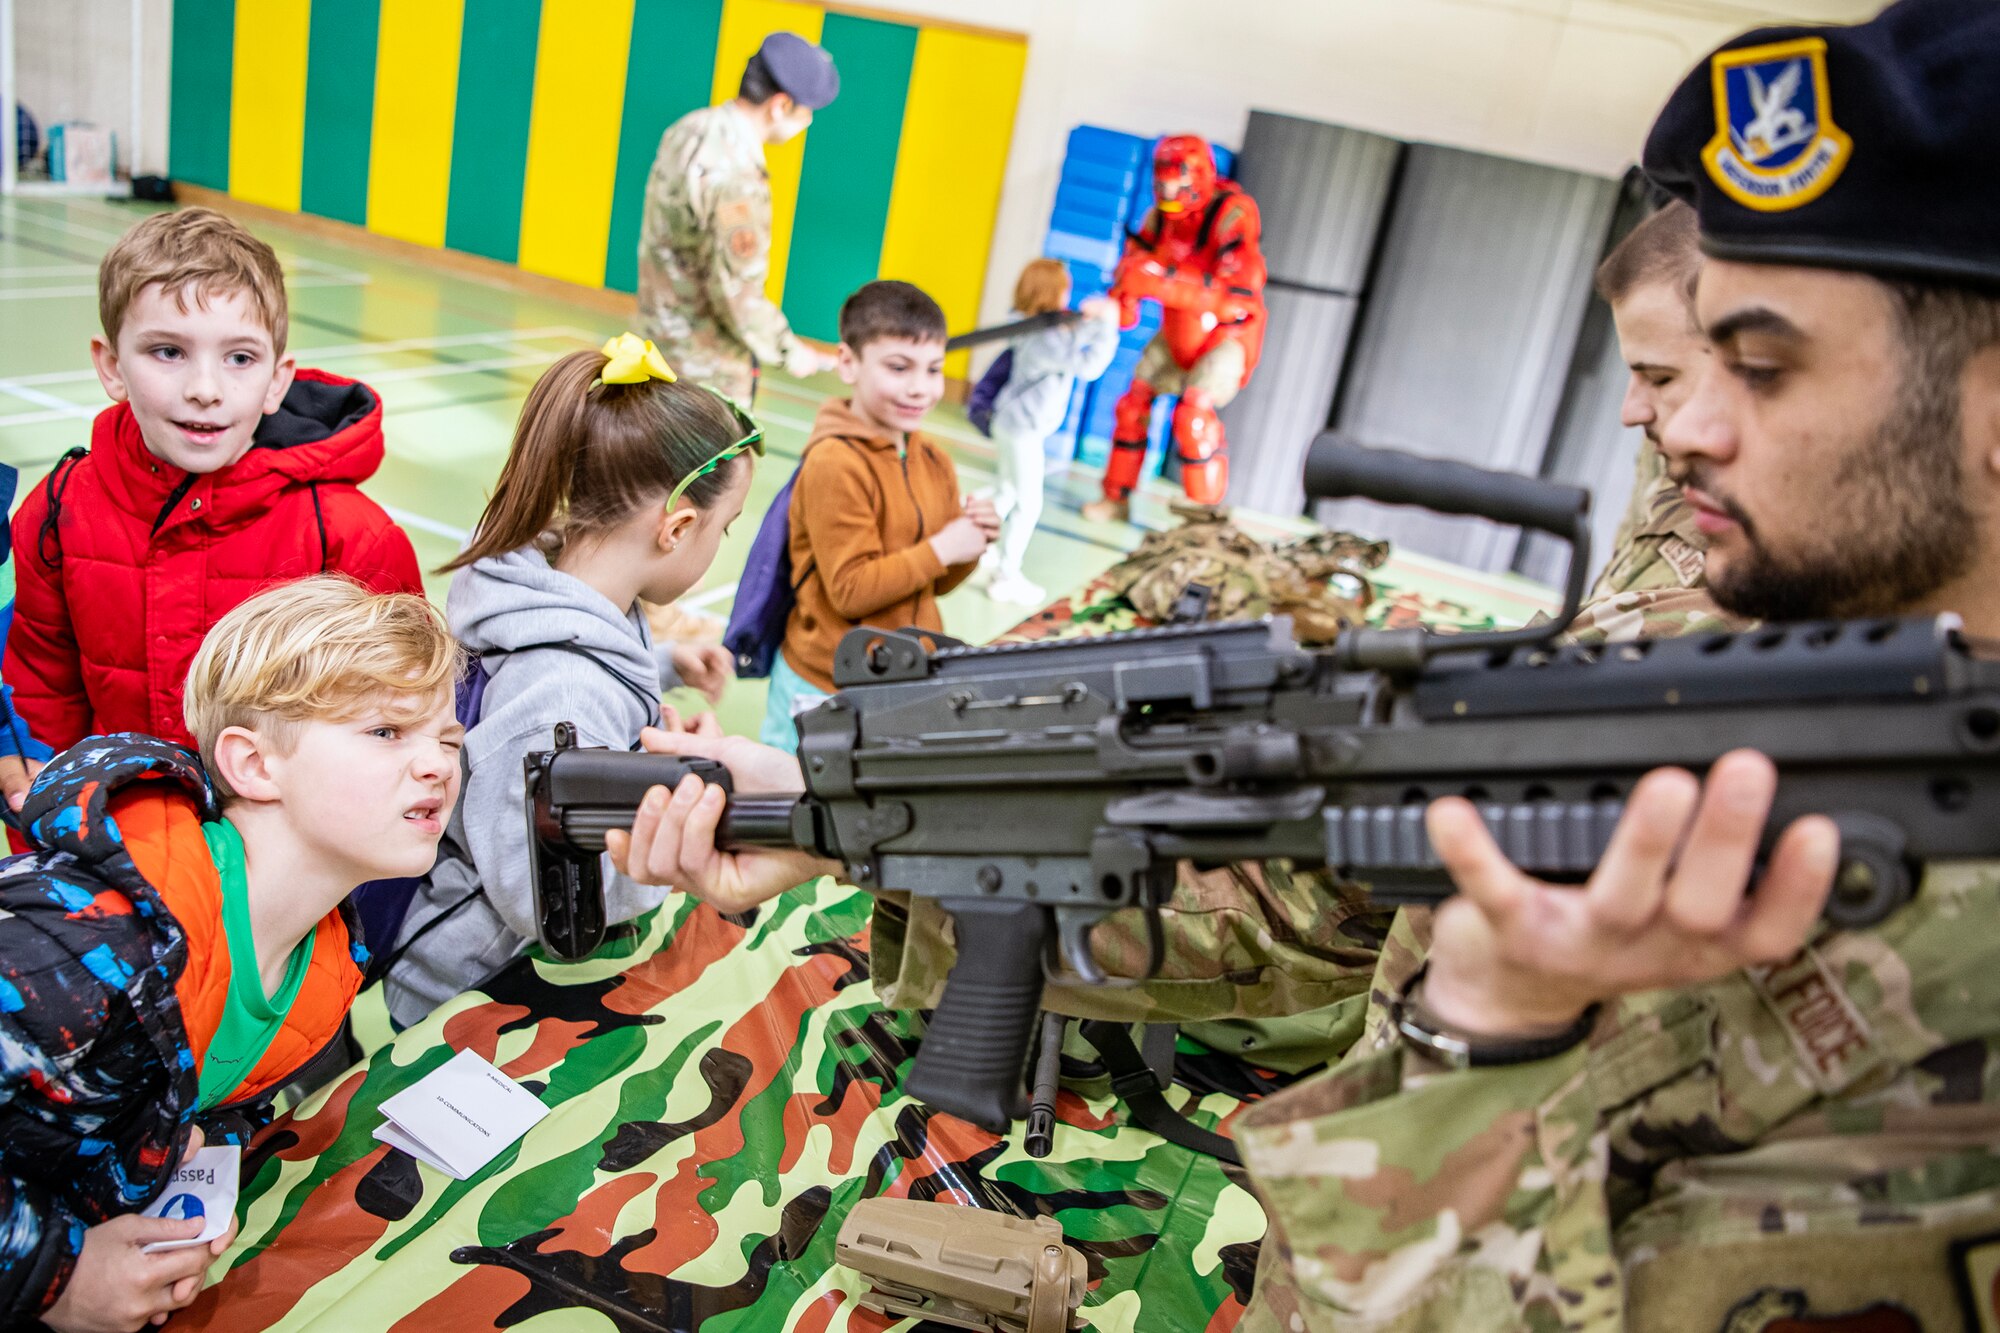 A 423d Security Forces Squadron Airman displays a M249 Automatic Rifle to Alconbury Elementary School students during Camp Kudos at RAF Alconbury, England, April 14, 2023. The camp gave students the opportunity to experience and learn about various aspects of deployment preparation and the wing mission. (U.S. Air Force photo by Staff Sgt. Eugene Oliver)